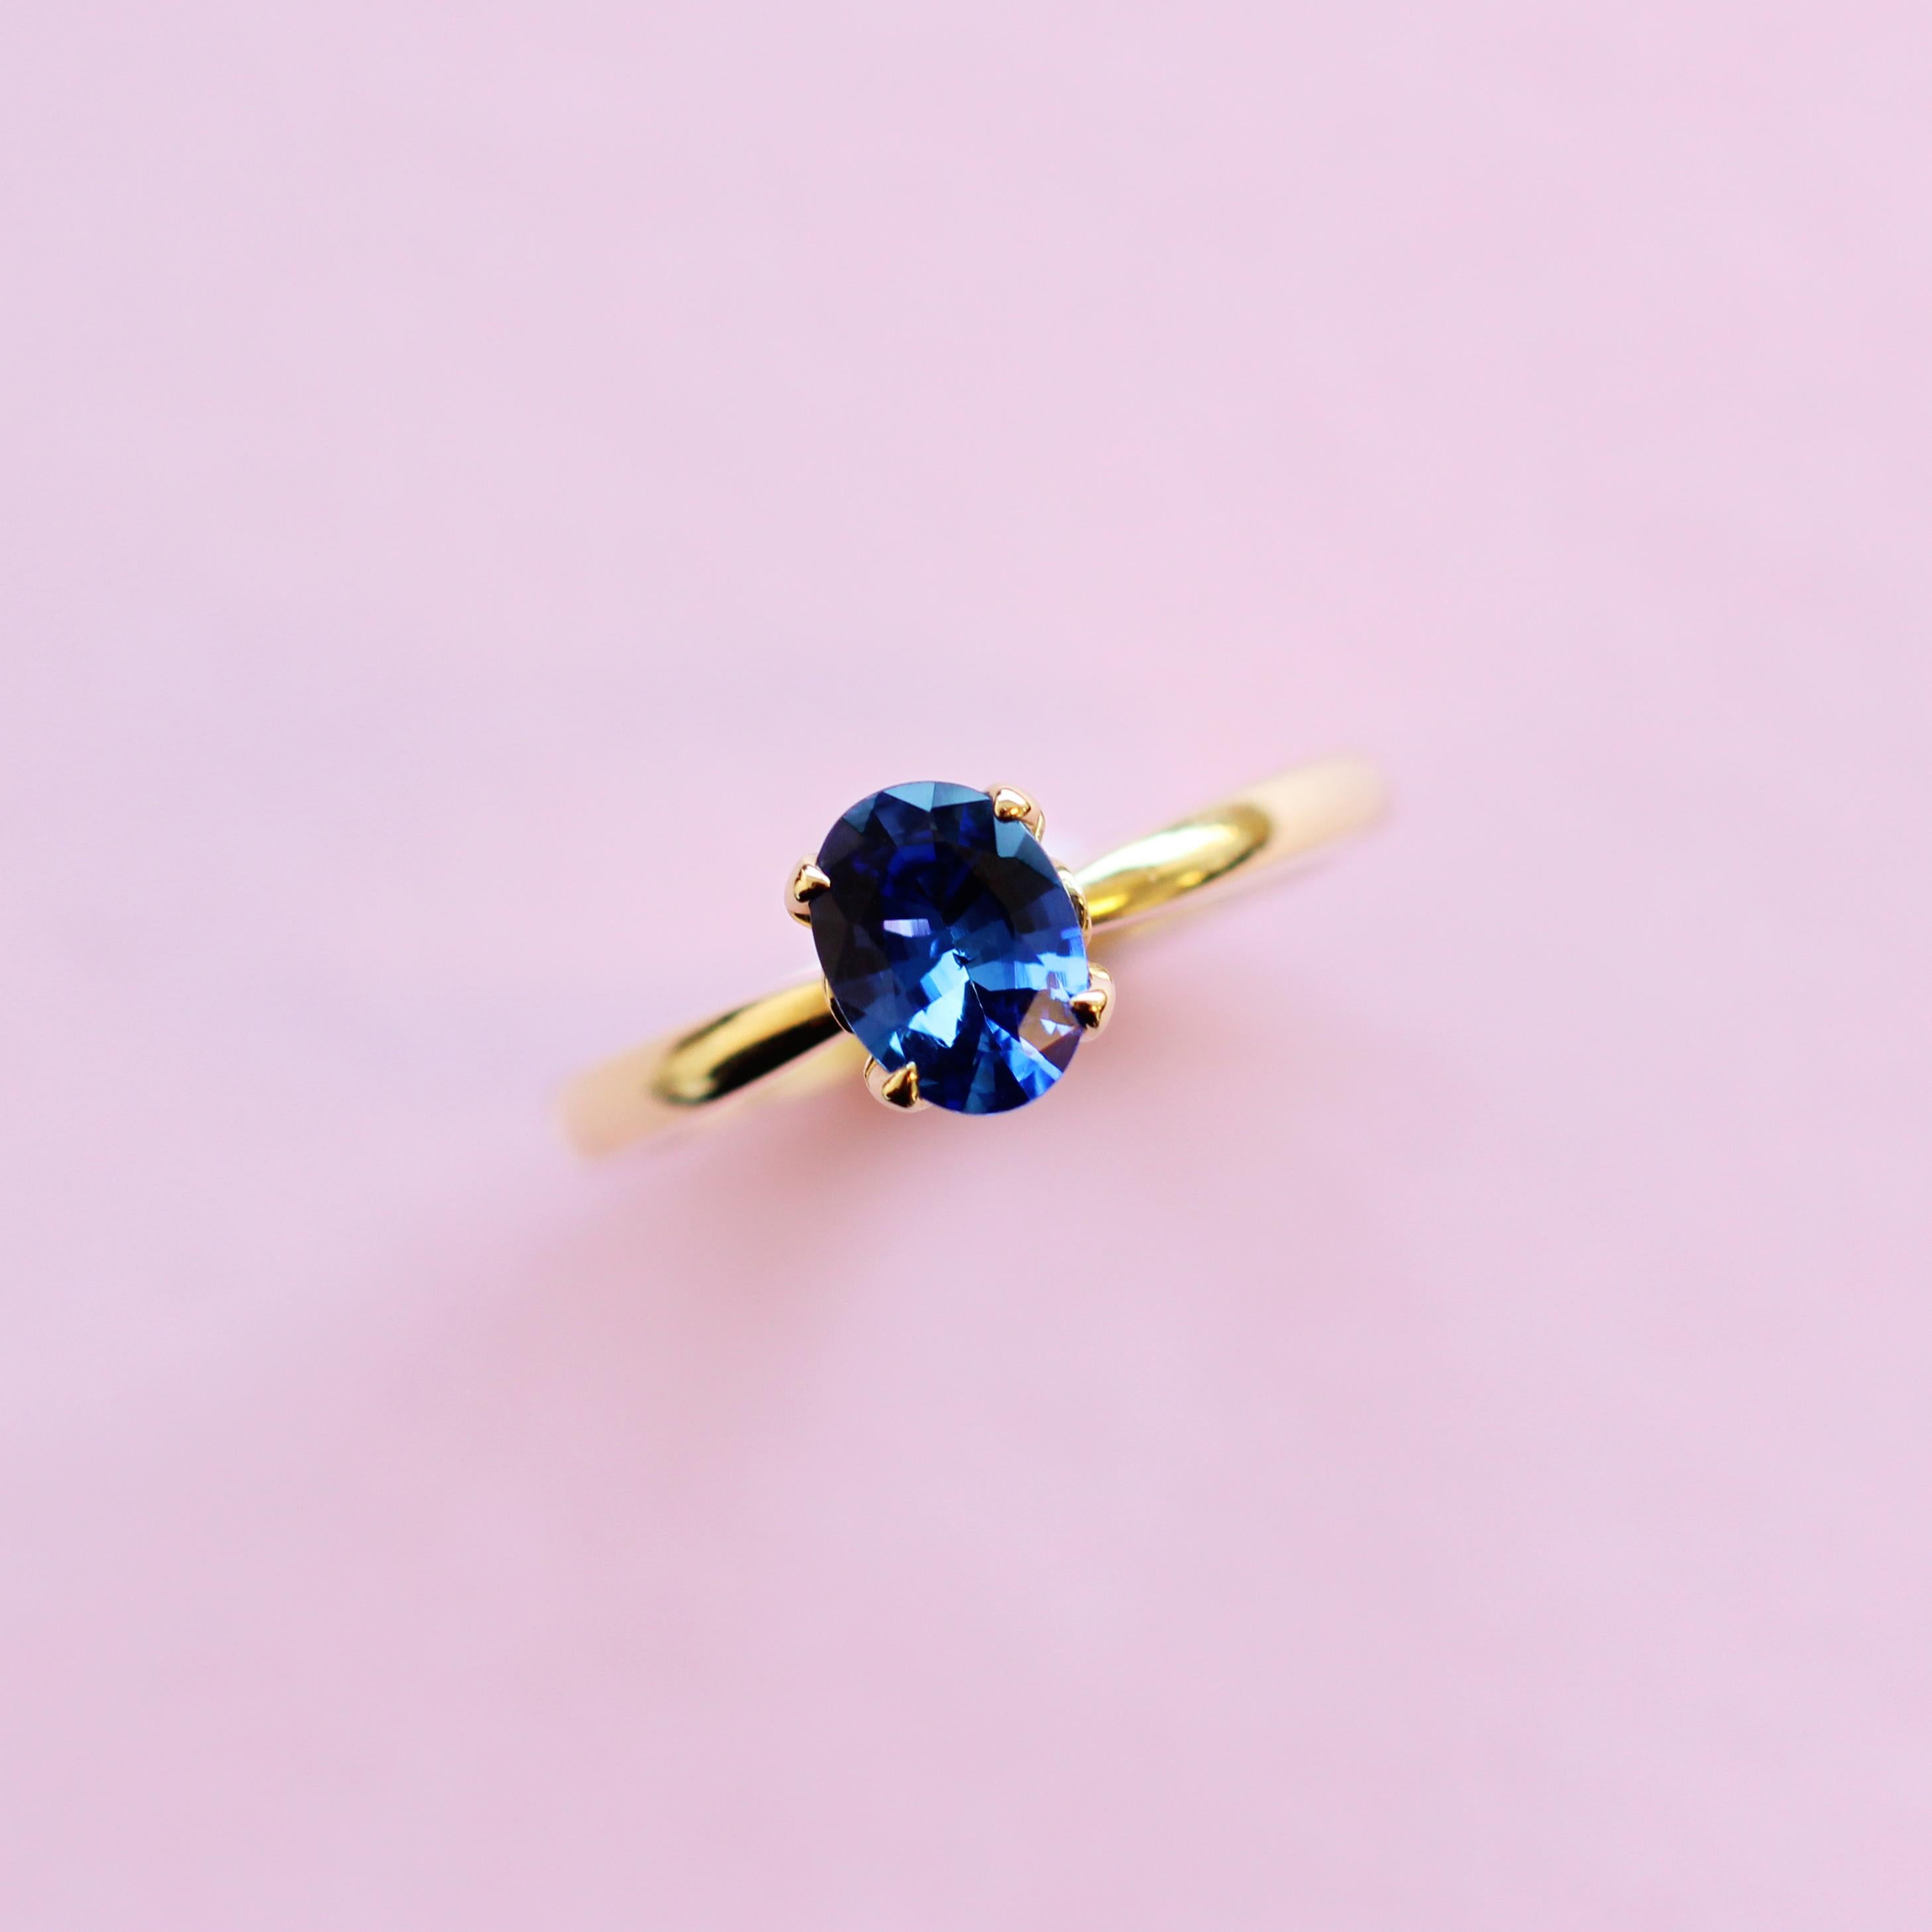 For Sale:  Blue Sapphire Solitaire Ring in 18 Karat Yellow Gold 5